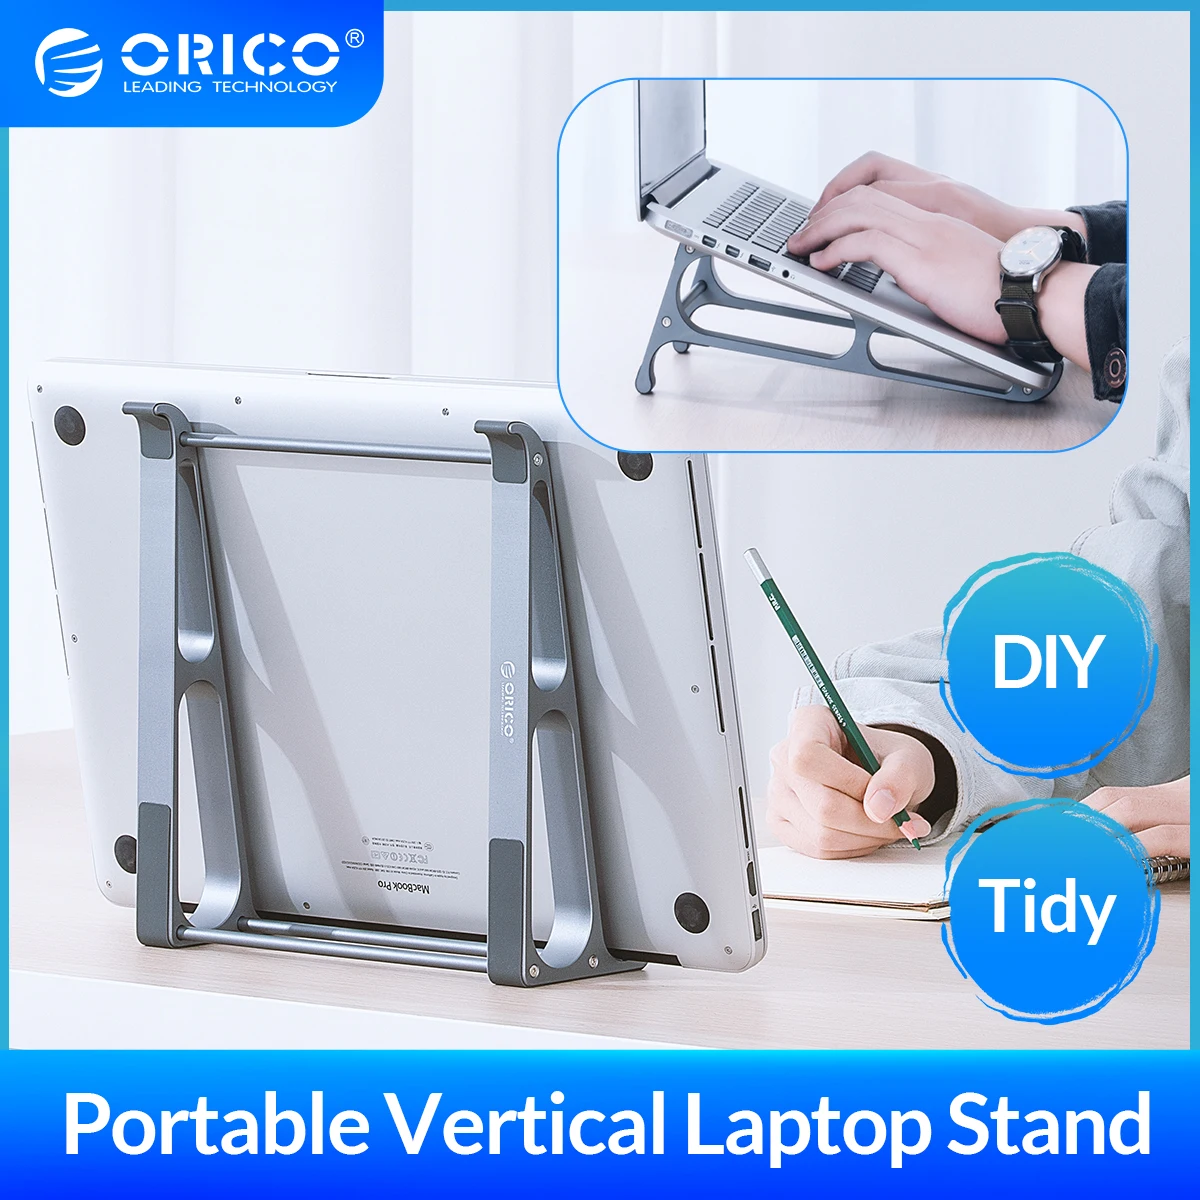 

ORICO 2 IN 1 Portable Vertical Laptop Stand Riser Portable Aluminium Detachable Computer Holder for 13-17 inch MacBook Notebook